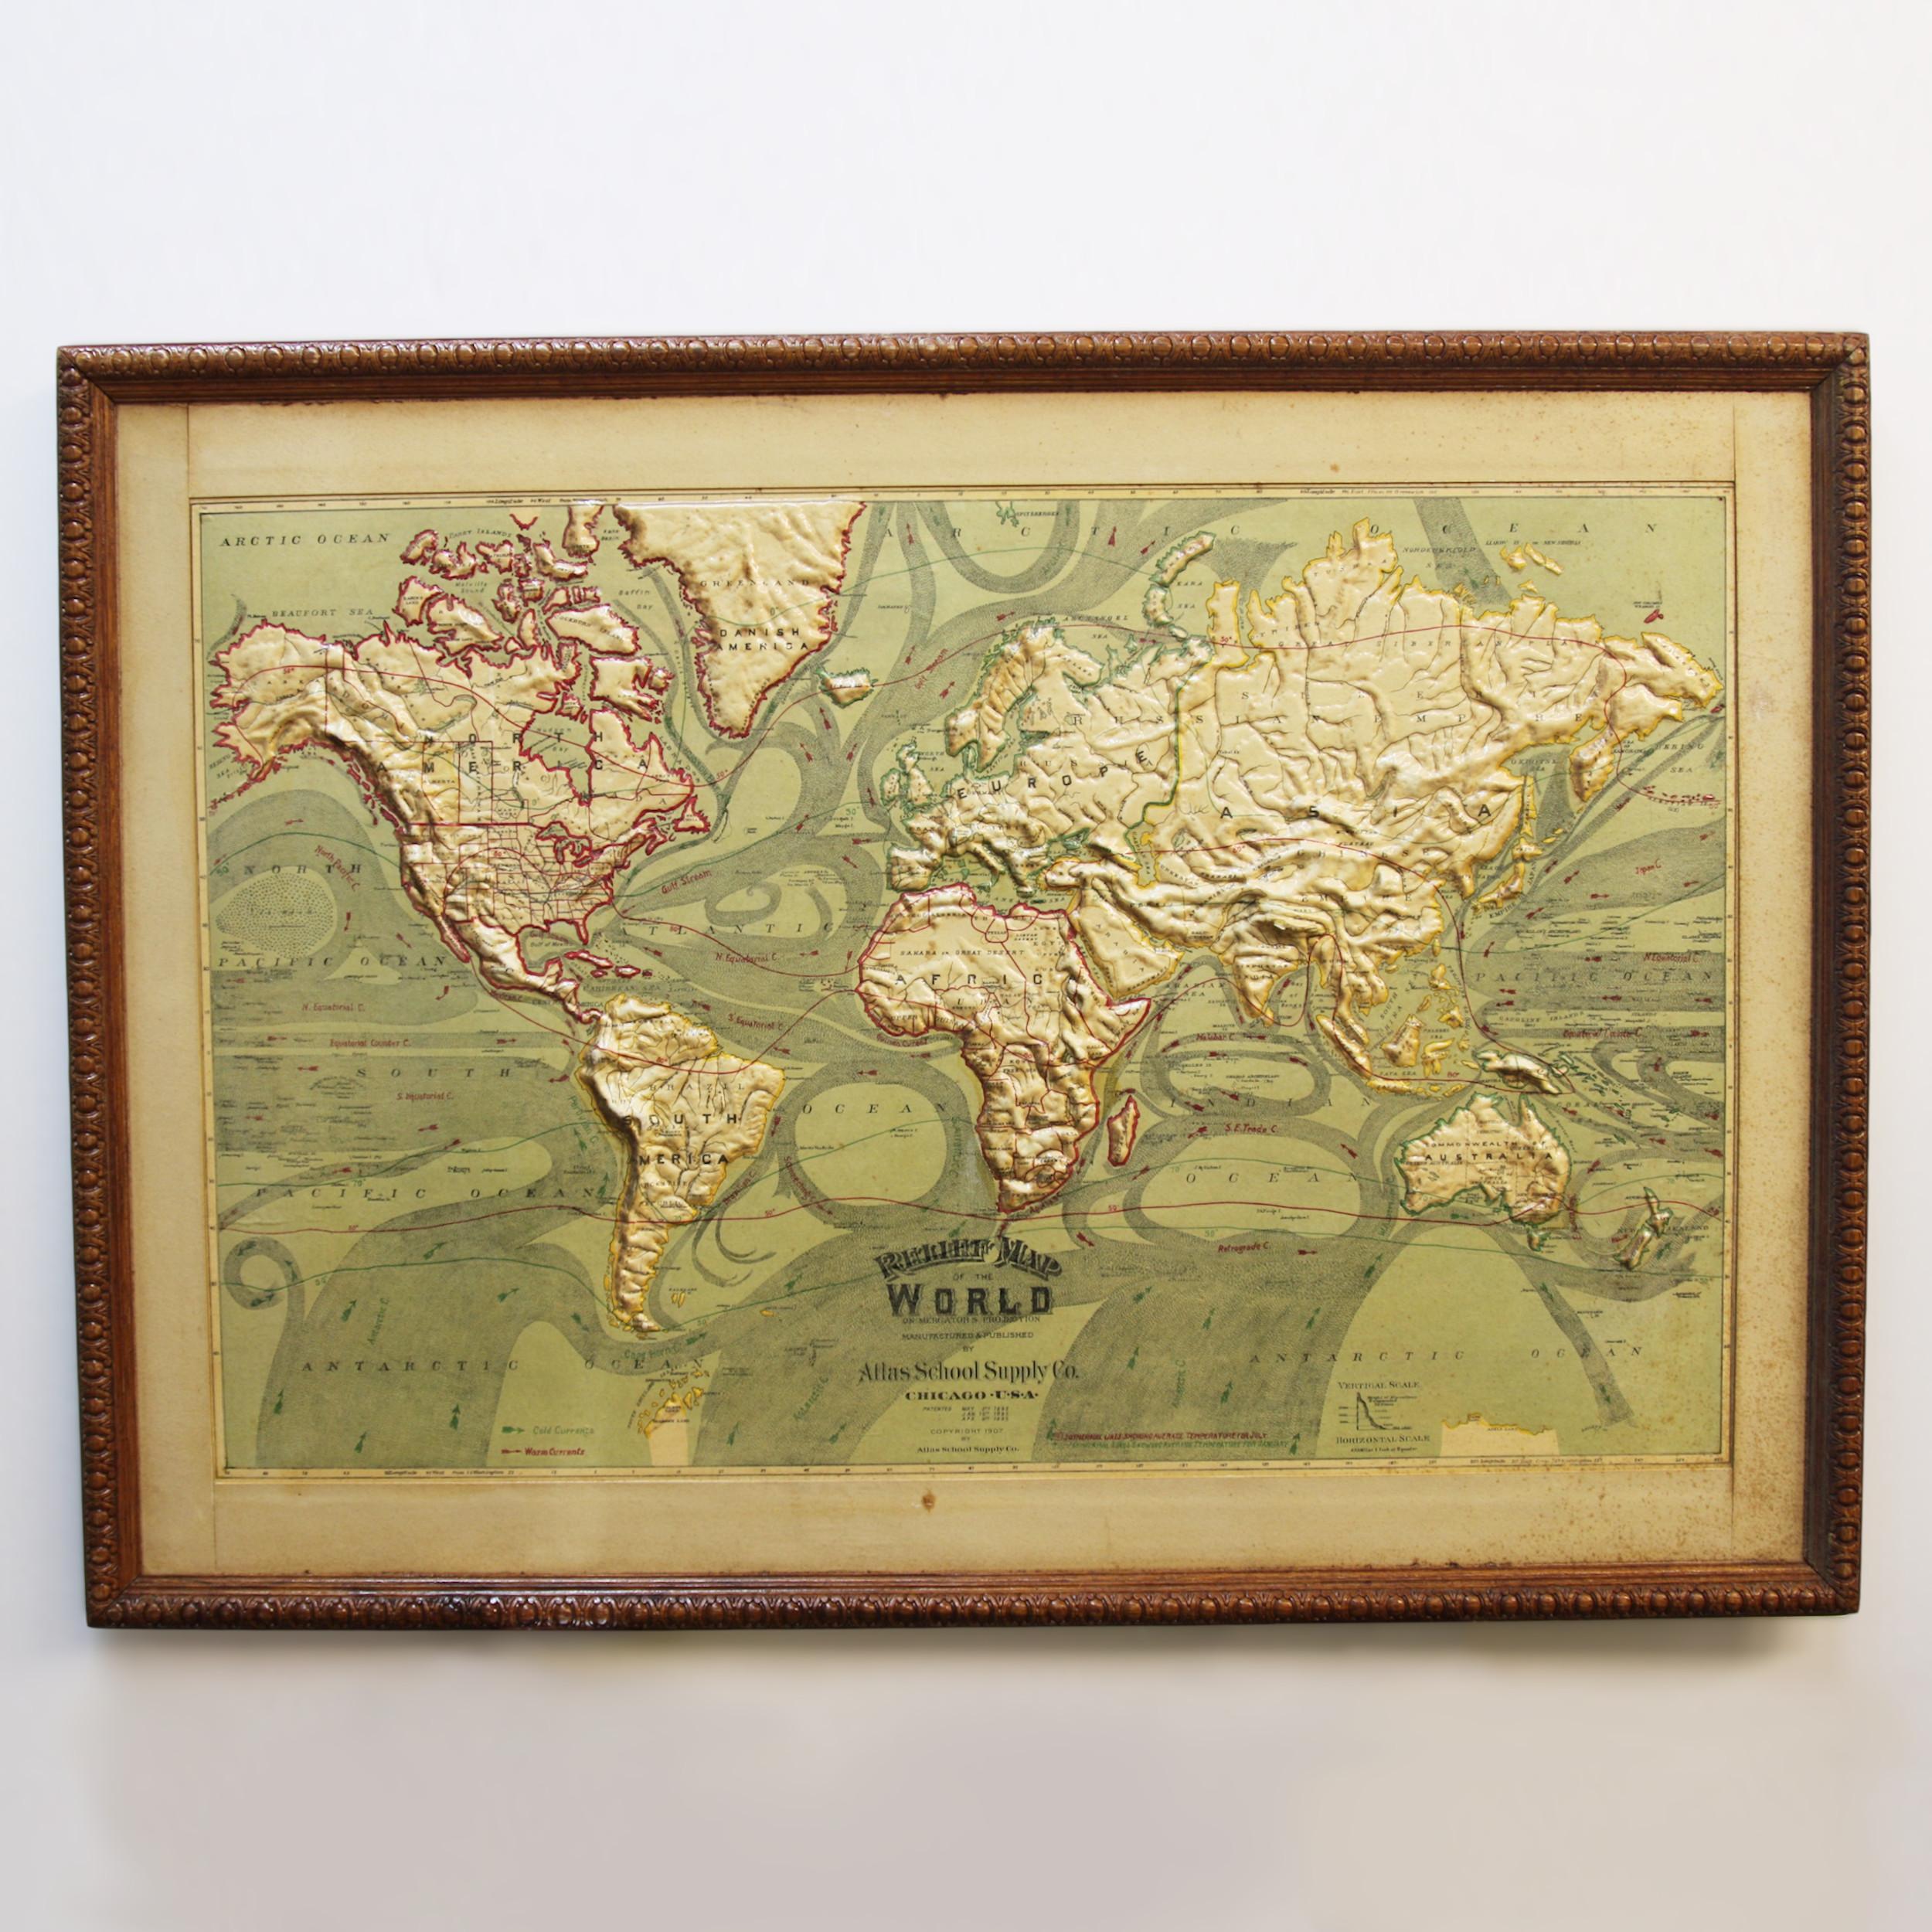 Remarkably original, 1907 relief map of world by the Atlas School Supply Co. of Chicago, Illinois. This exceptional quality map features its original oak frame, heavy-duty stretcher, bold graphics and beautifully molded 3-D papier mâché topography.